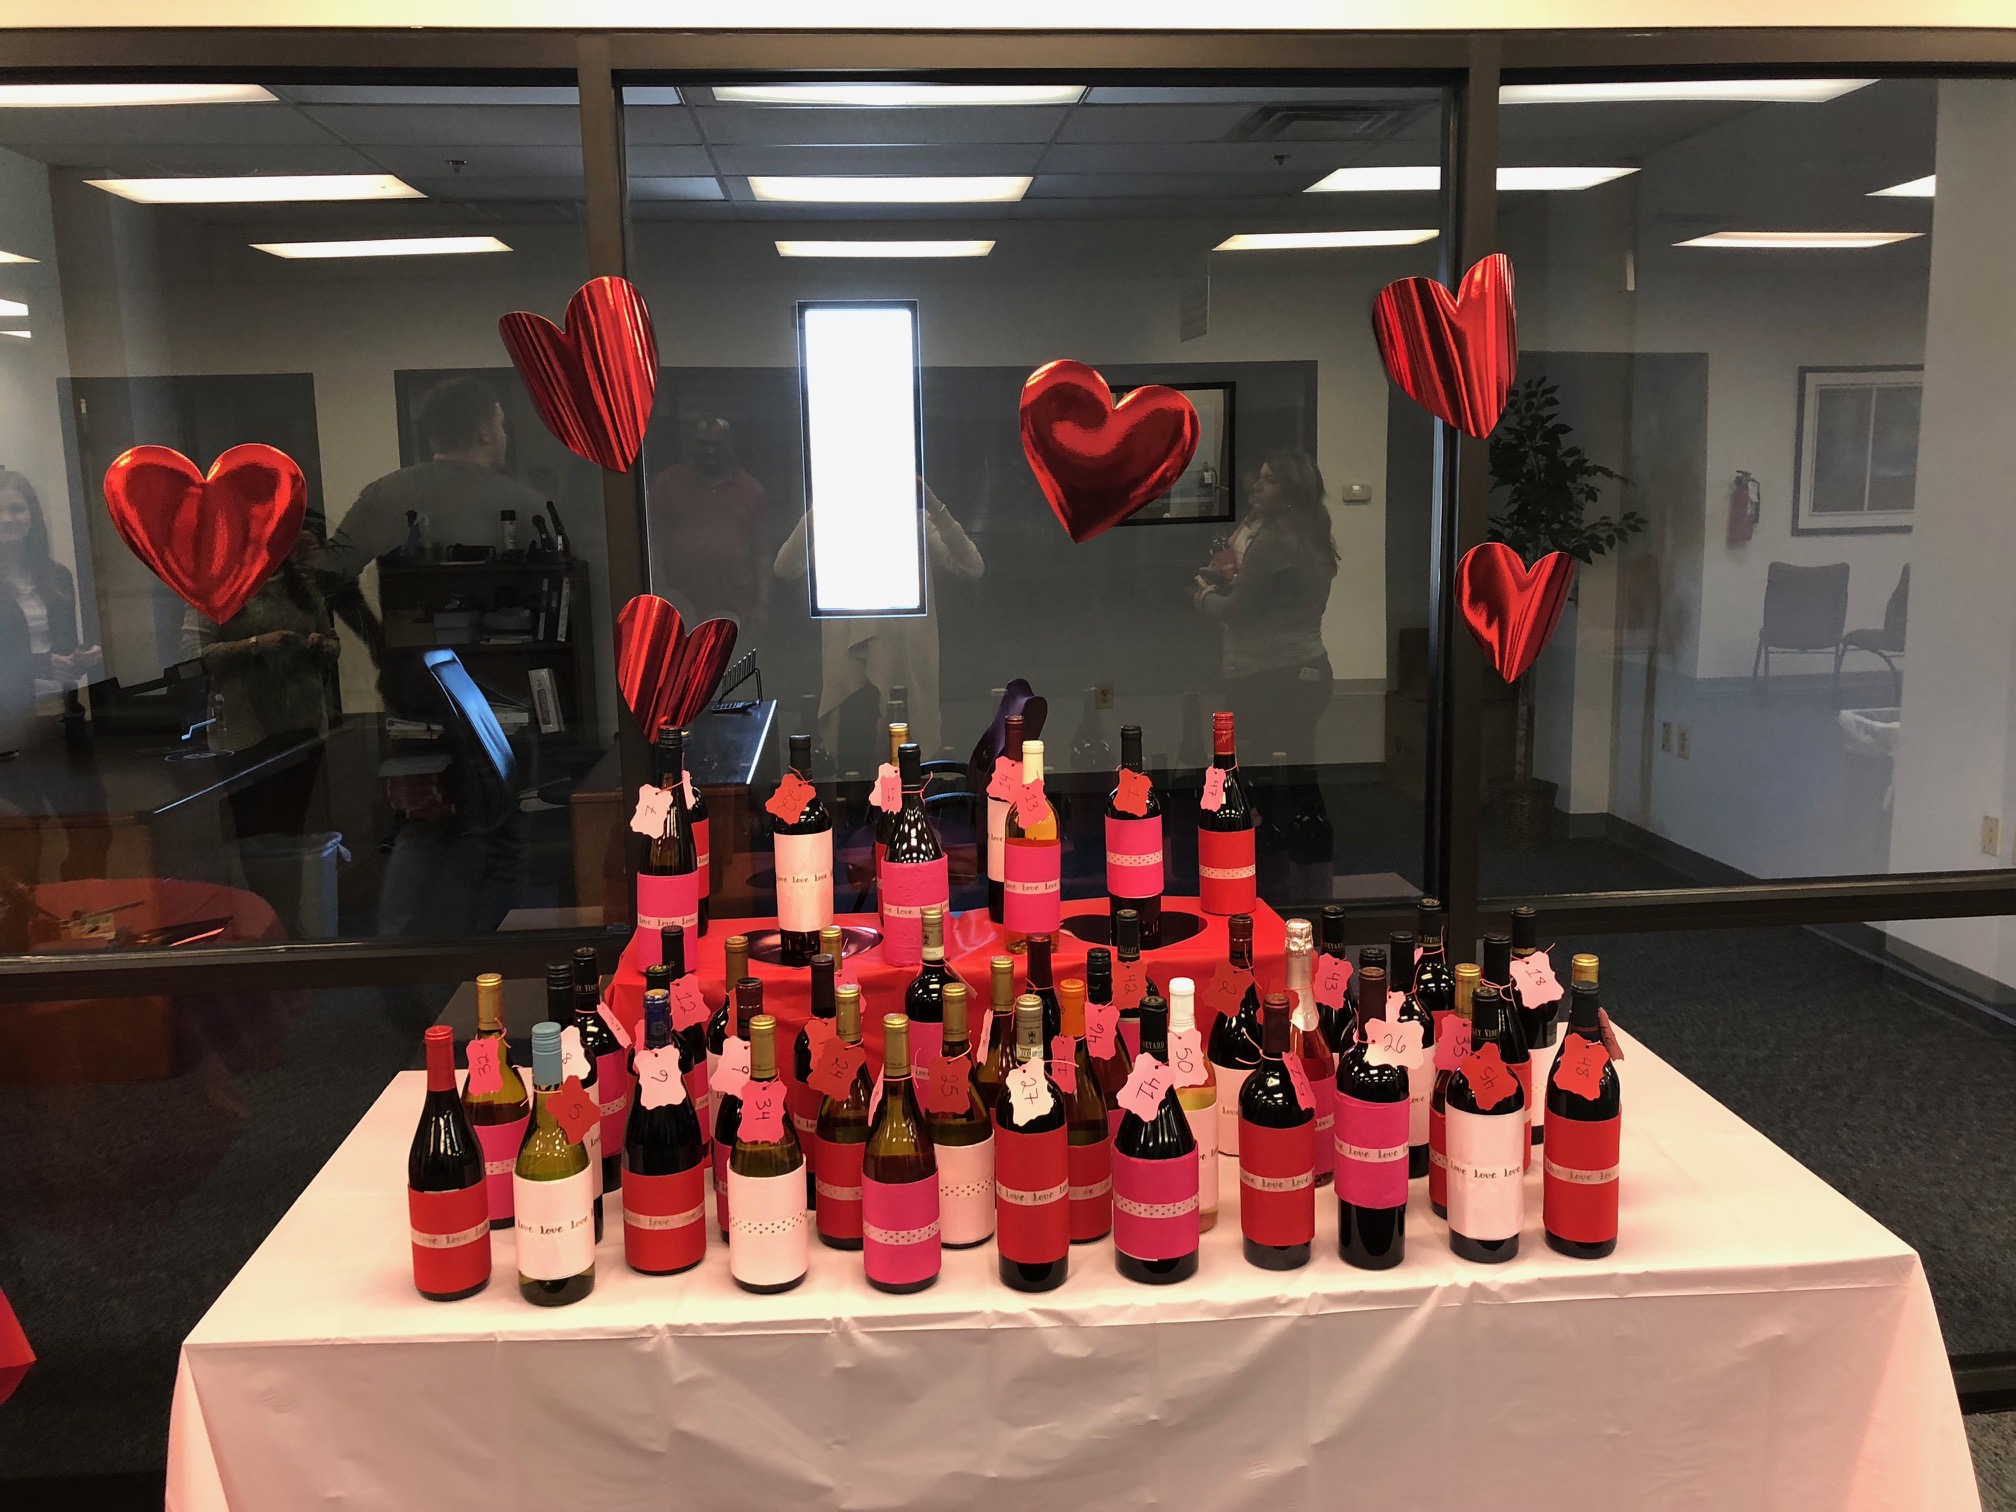 Hilldrup employee participating in Valentine's Day activity